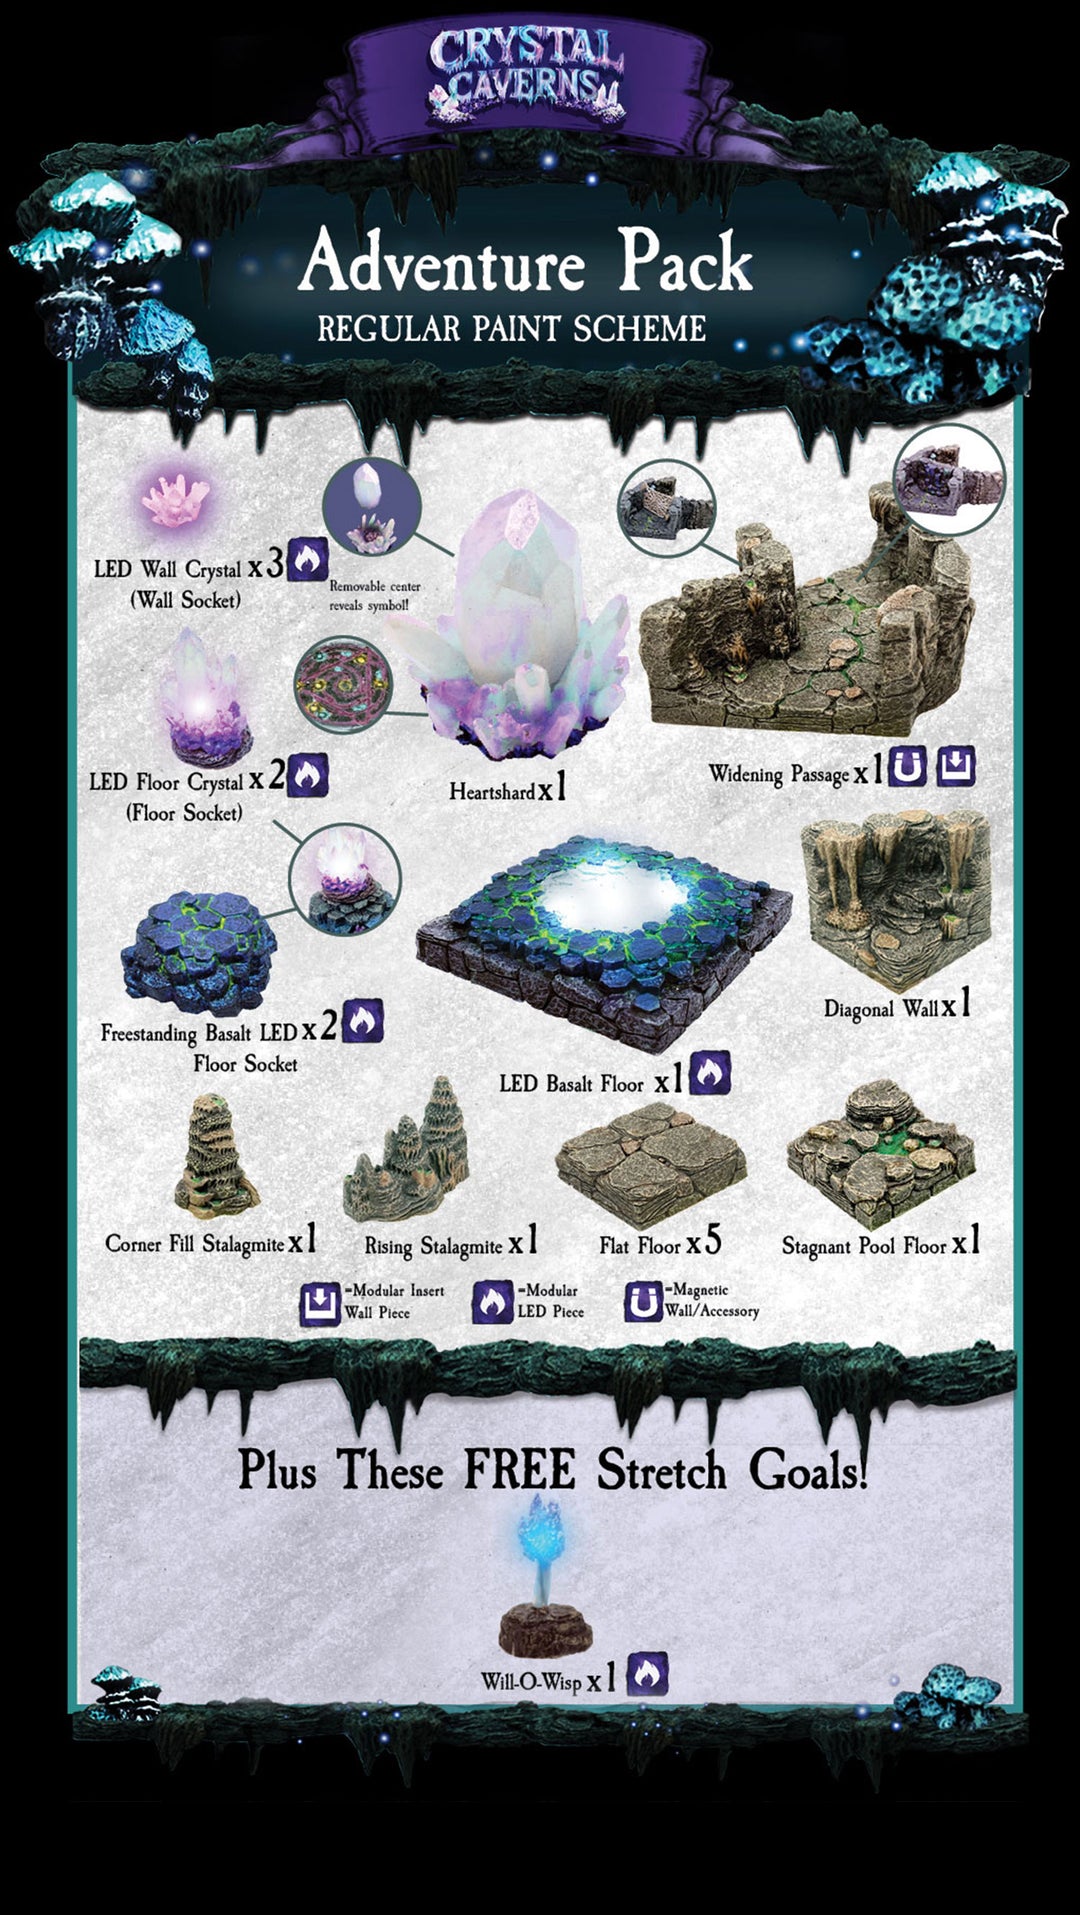 Crystal Cavern Adventure Pack - Option with Standard Cavern Paint